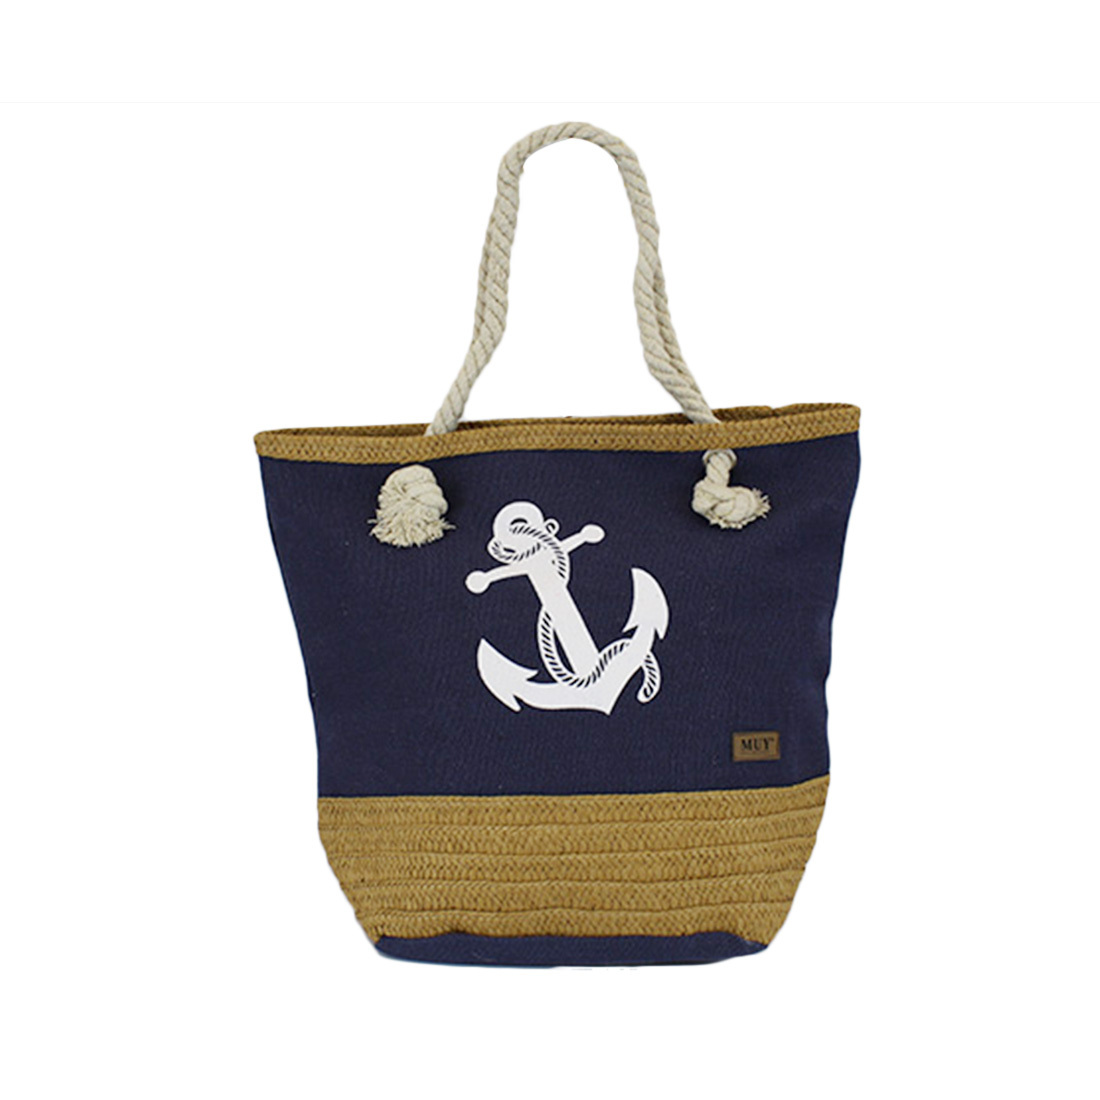 * Straw beach bags with anchor